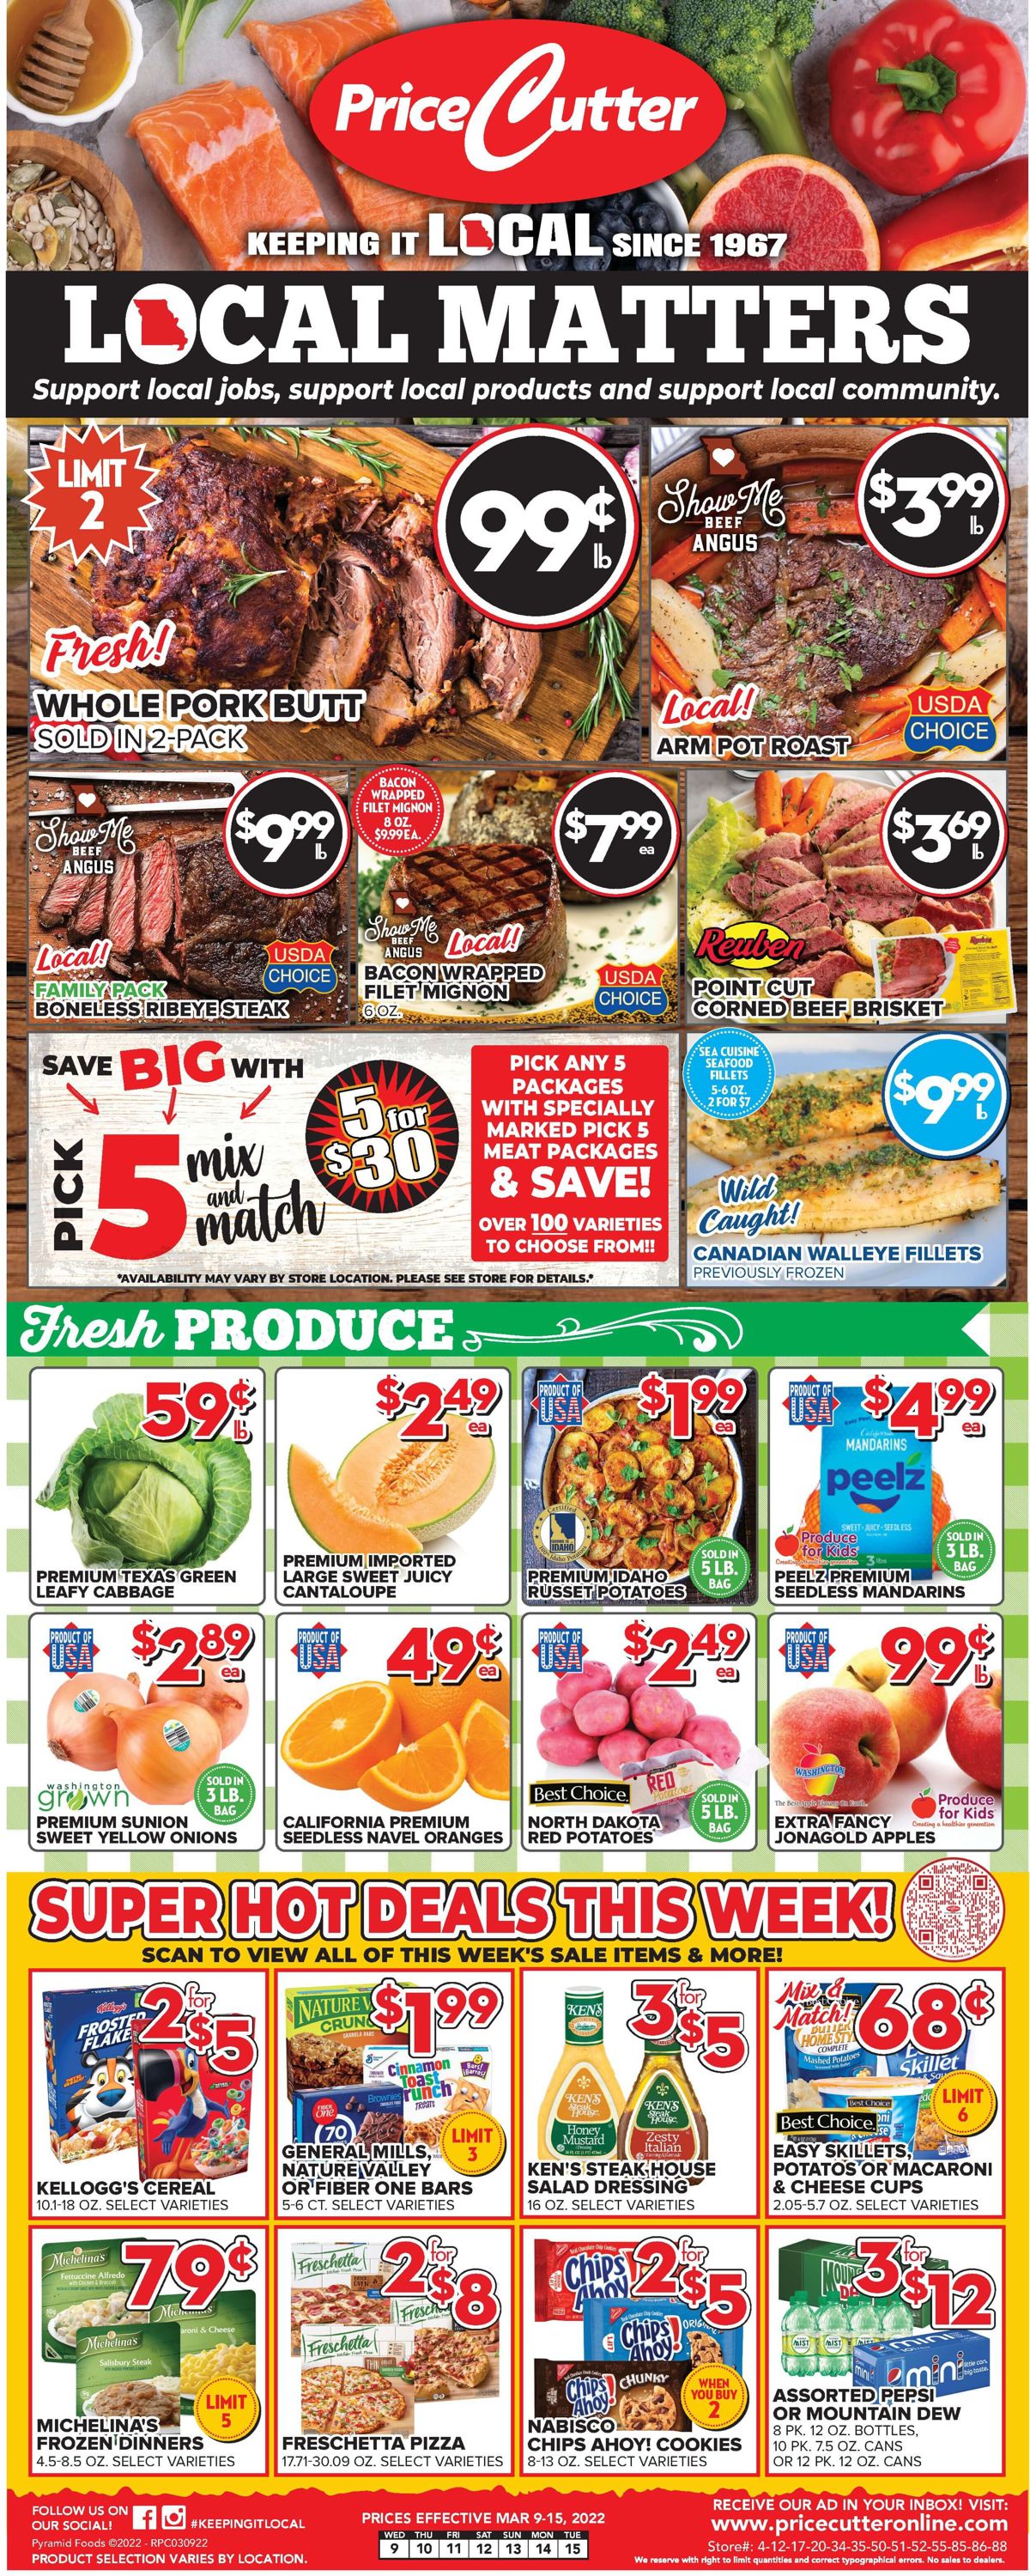 Price Cutter Weekly Ad Circular - valid 03/09-03/15/2022